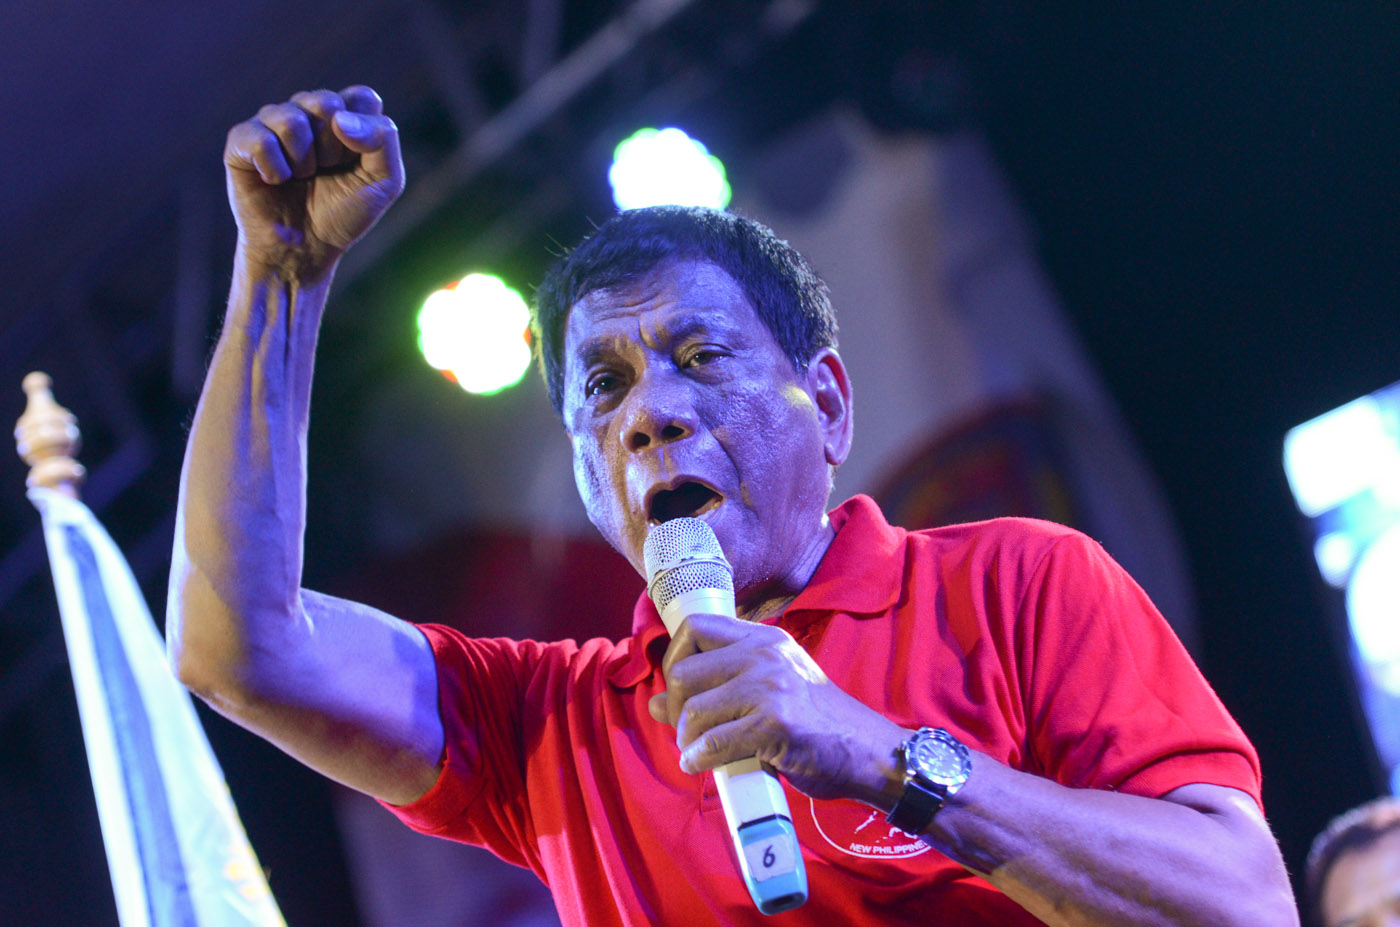 POLL FRONT-RUNNER. Presidential candidate Rodrigo Duterte speaks at a rally in Quezon City on April 12, 2016 